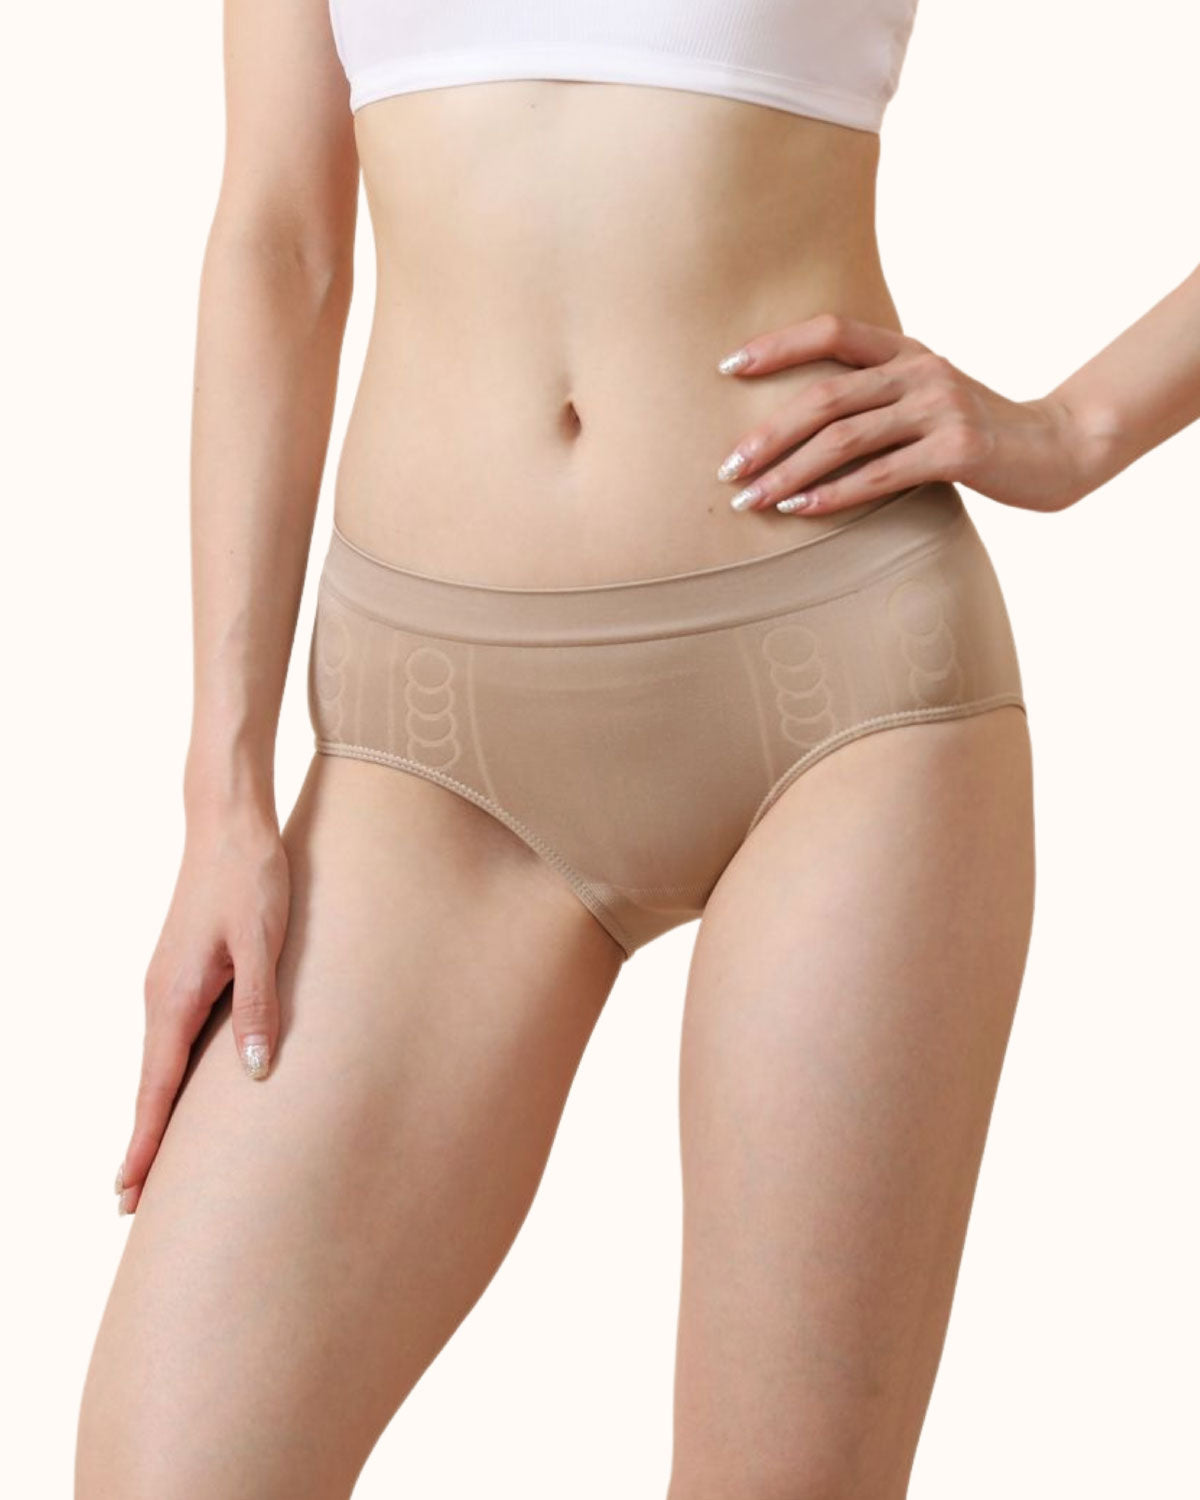 Style 9010 Medium Cut Panties Whole Carton (One Size, 160 Pcs of Each Color Black/White/Nude,480 Pcs in Total))